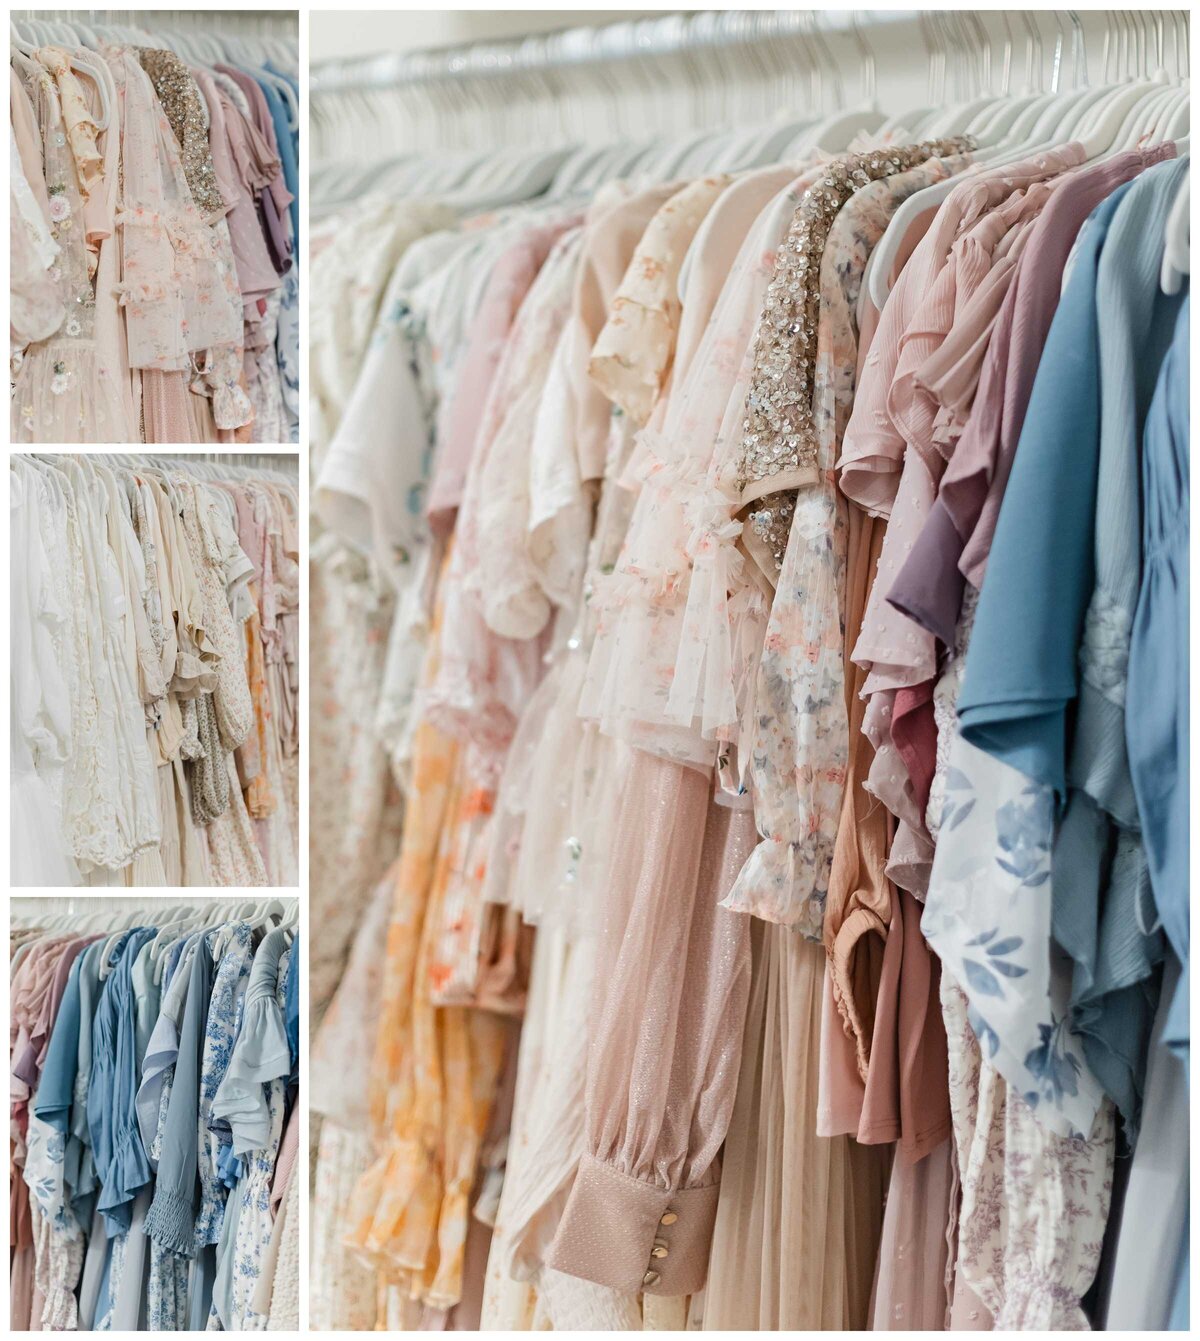 A beautiful photo showcasing many different styles and colors of the studio wardrobe that clients can use by Washington DC Family Photographer